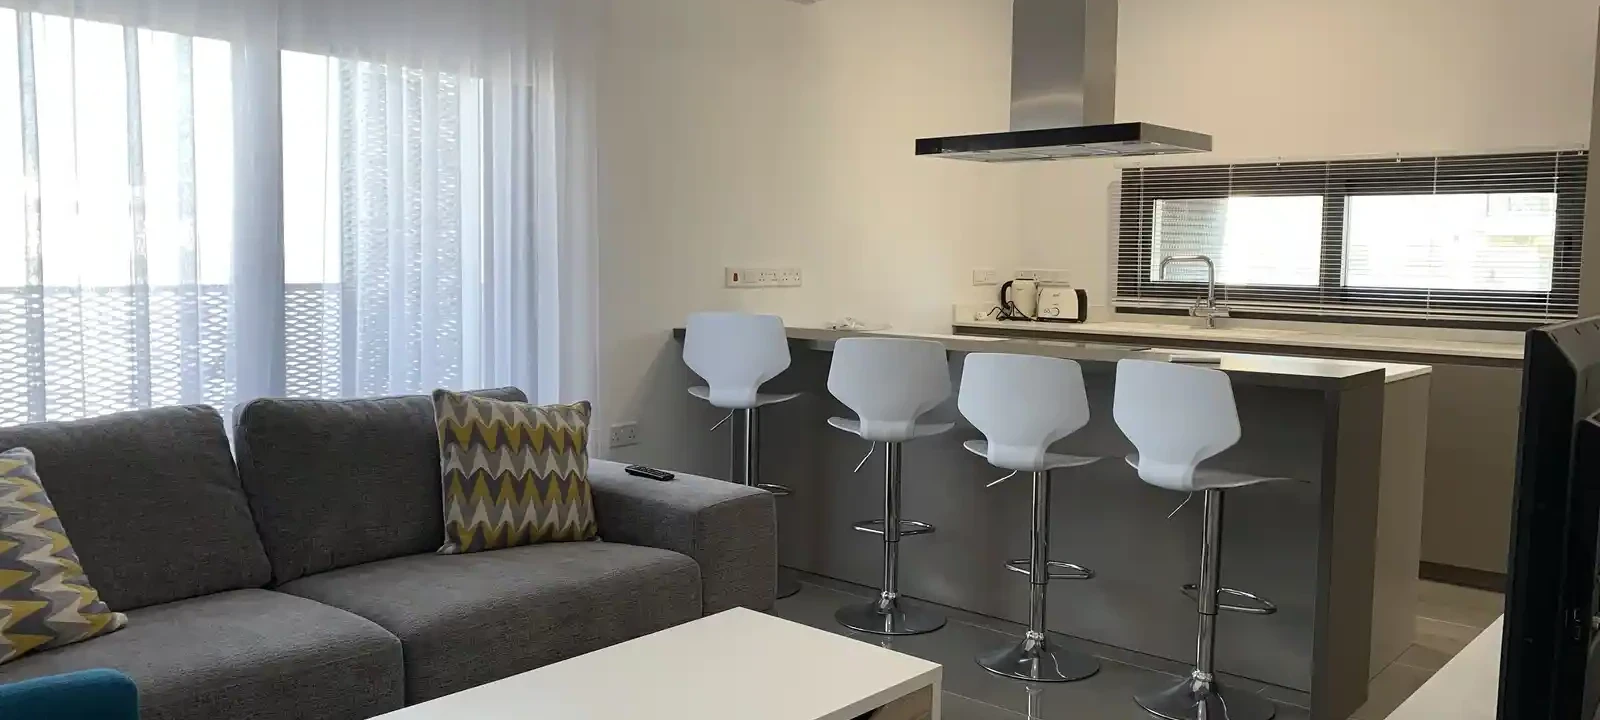 3-bedroom apartment to rent €2.600, image 1